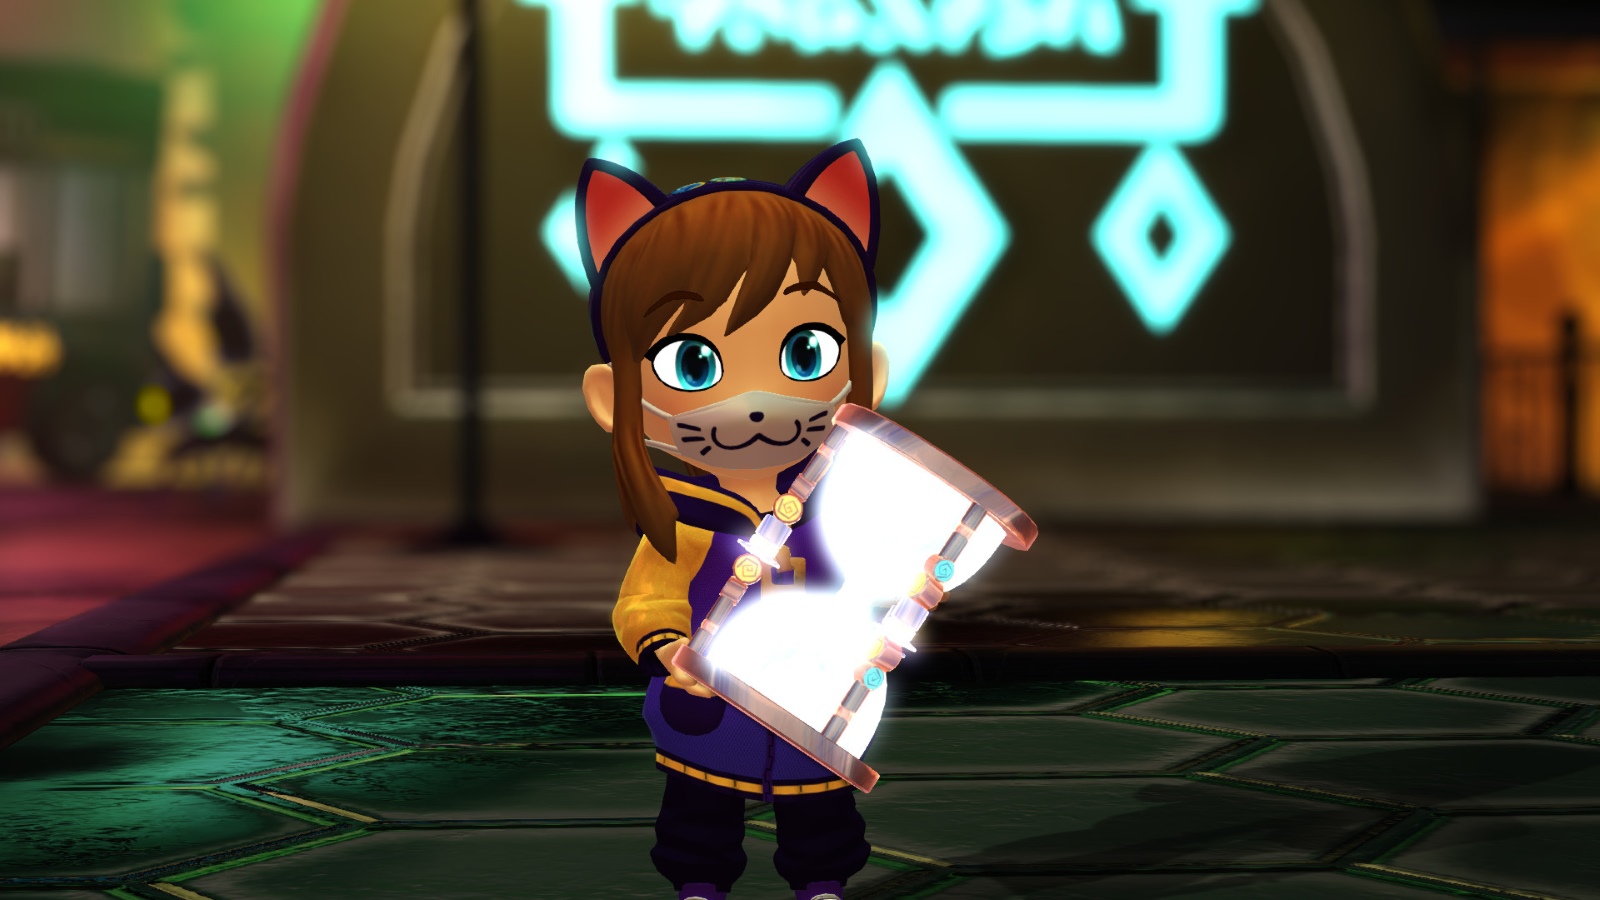 Apps Images A Hat In Time goes online with cats in todays